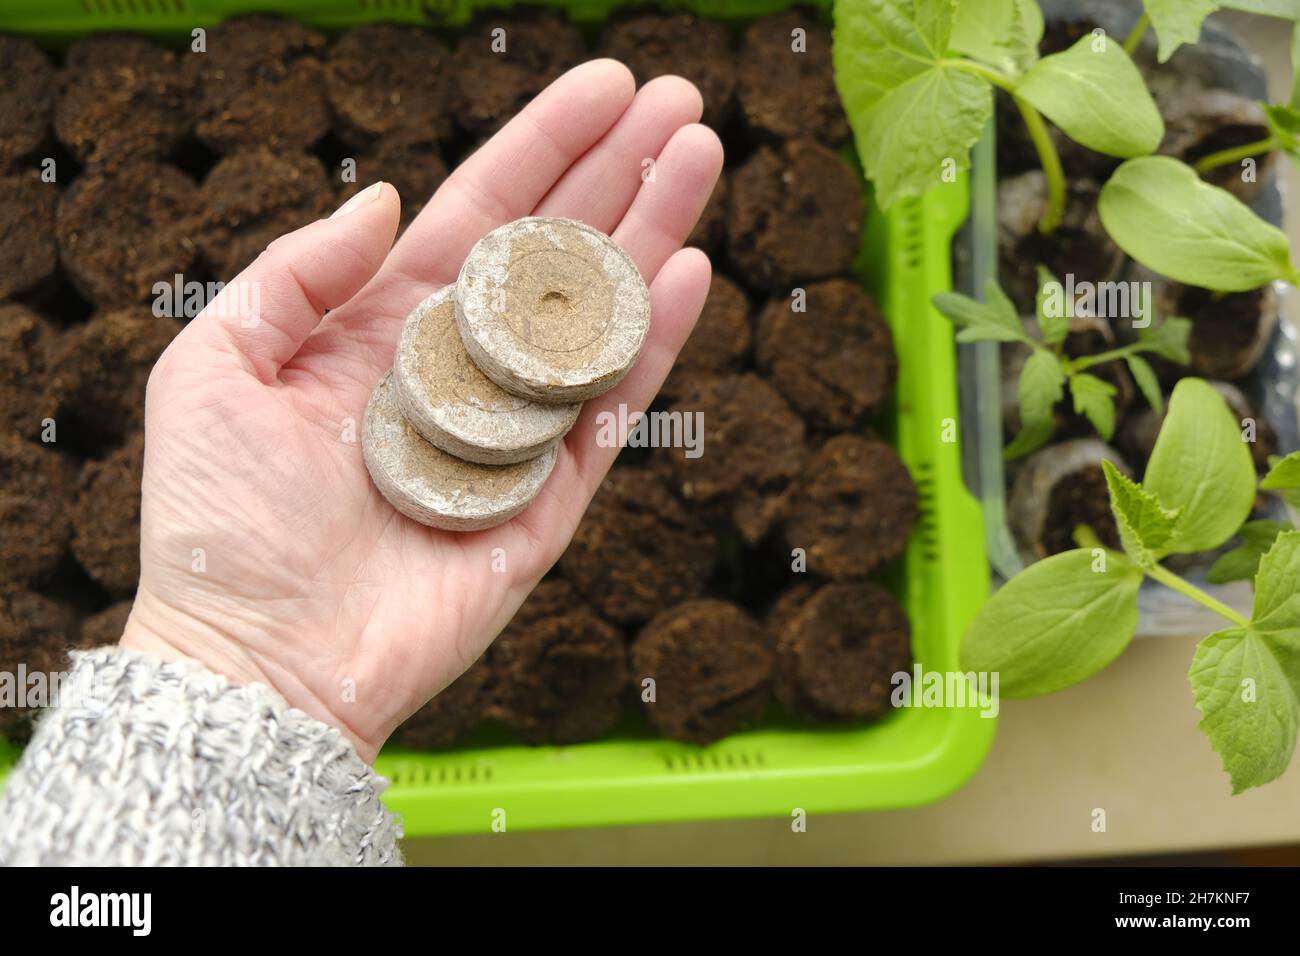 Peat tablets for seedlings. Planting organic material.Growing seedlings. Peat tablets in a hand on a seedling green tray background.plant seeds in Stock Photo